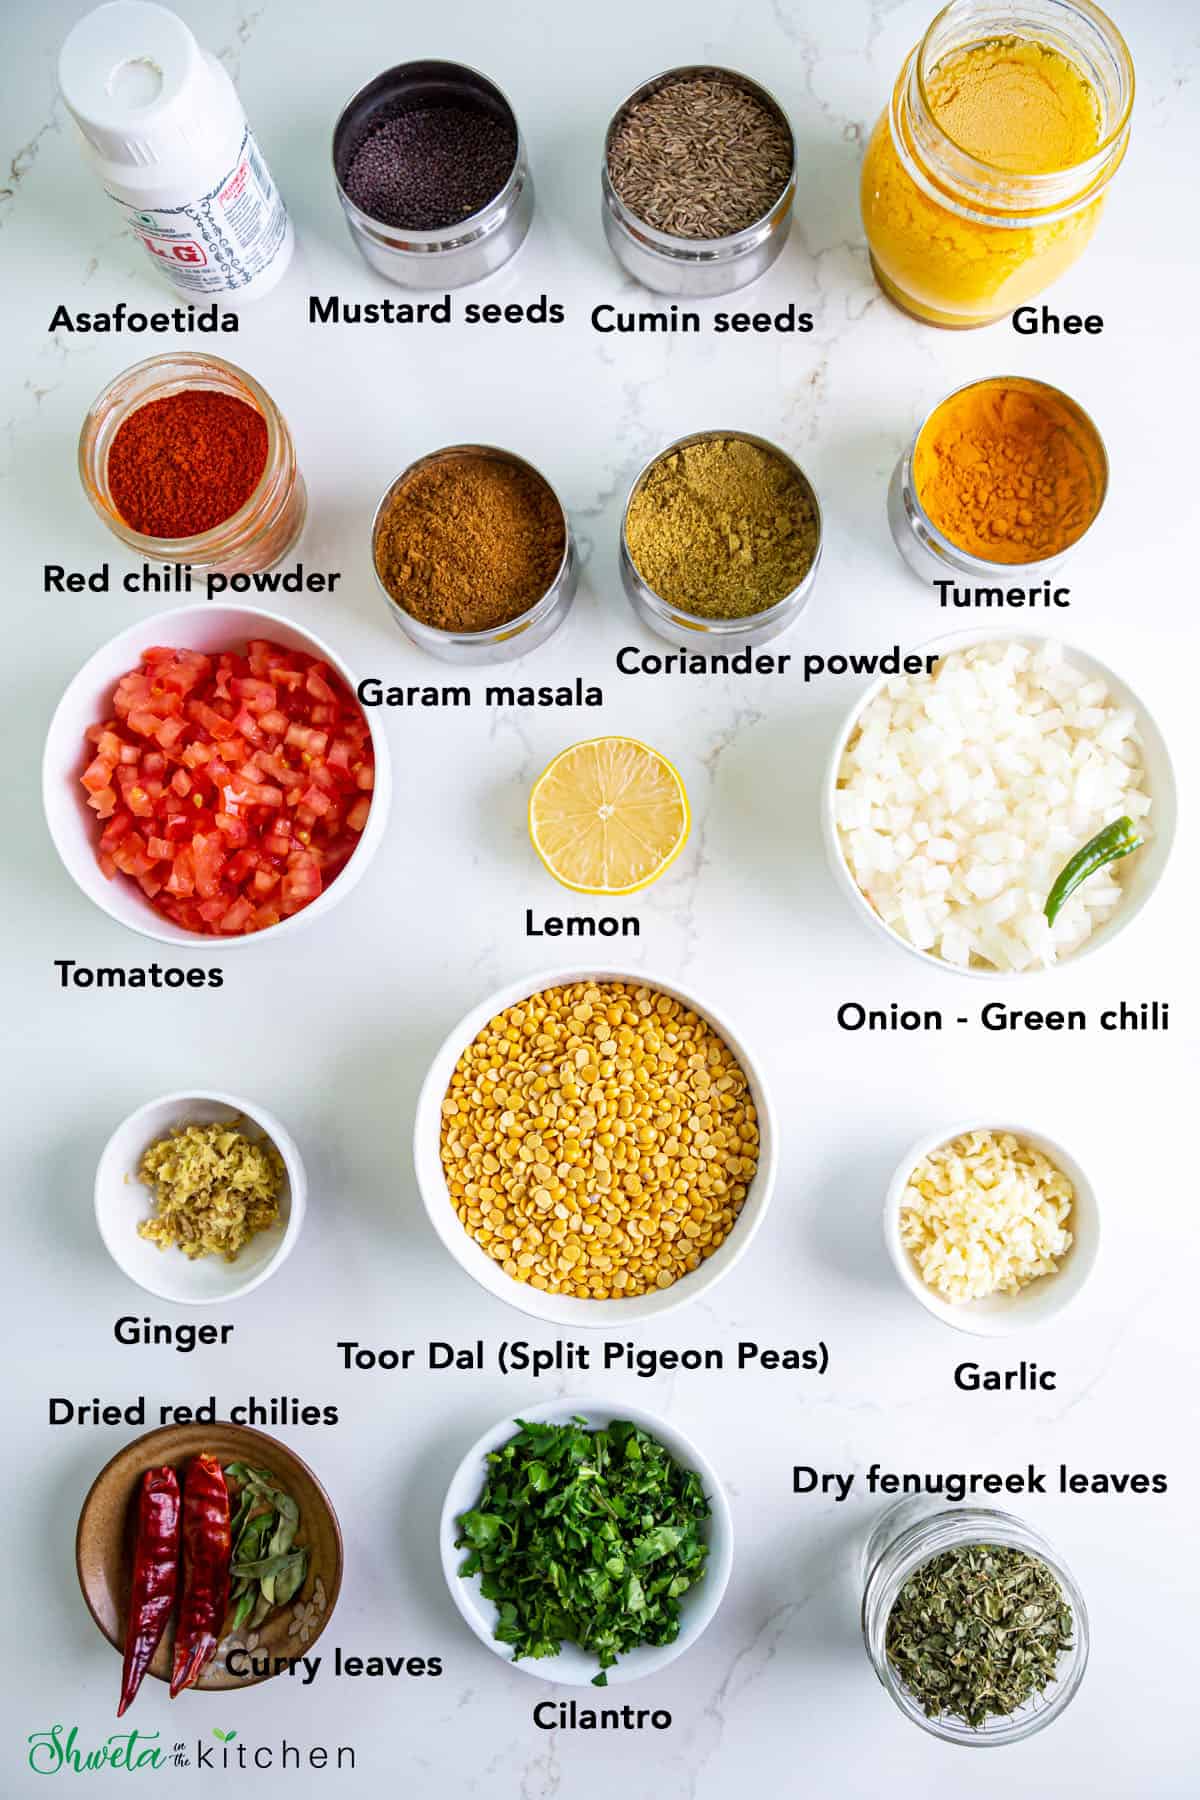 Ingredients for dal fry in bowls on white surface